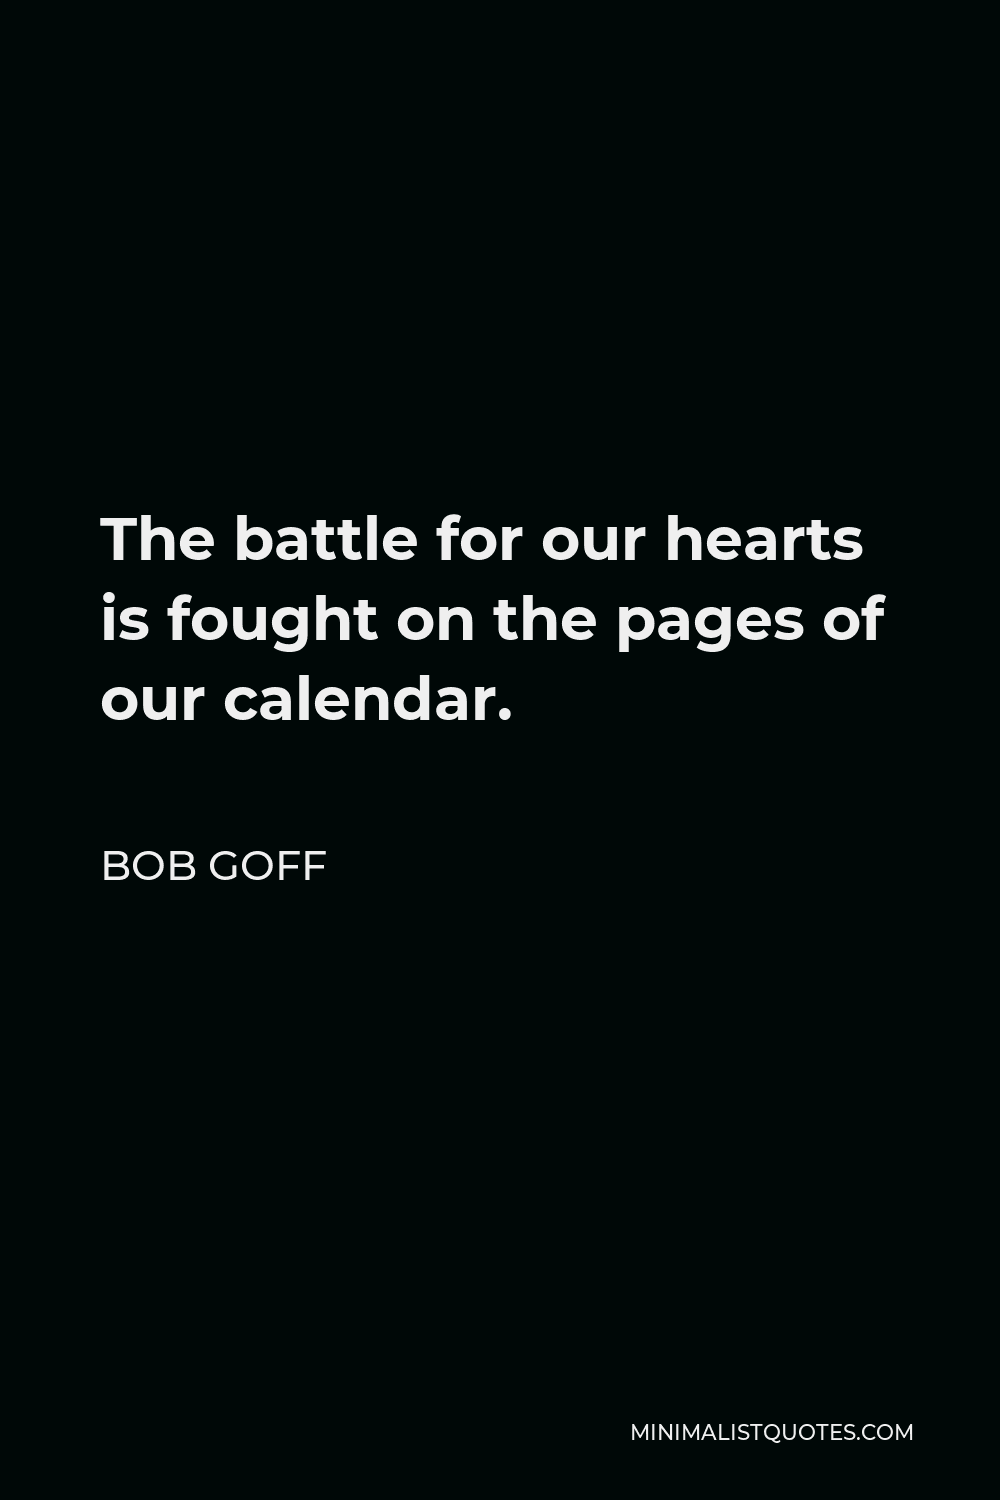 Bob Goff Quote - The battle for our hearts is fought on the pages of our calendar.